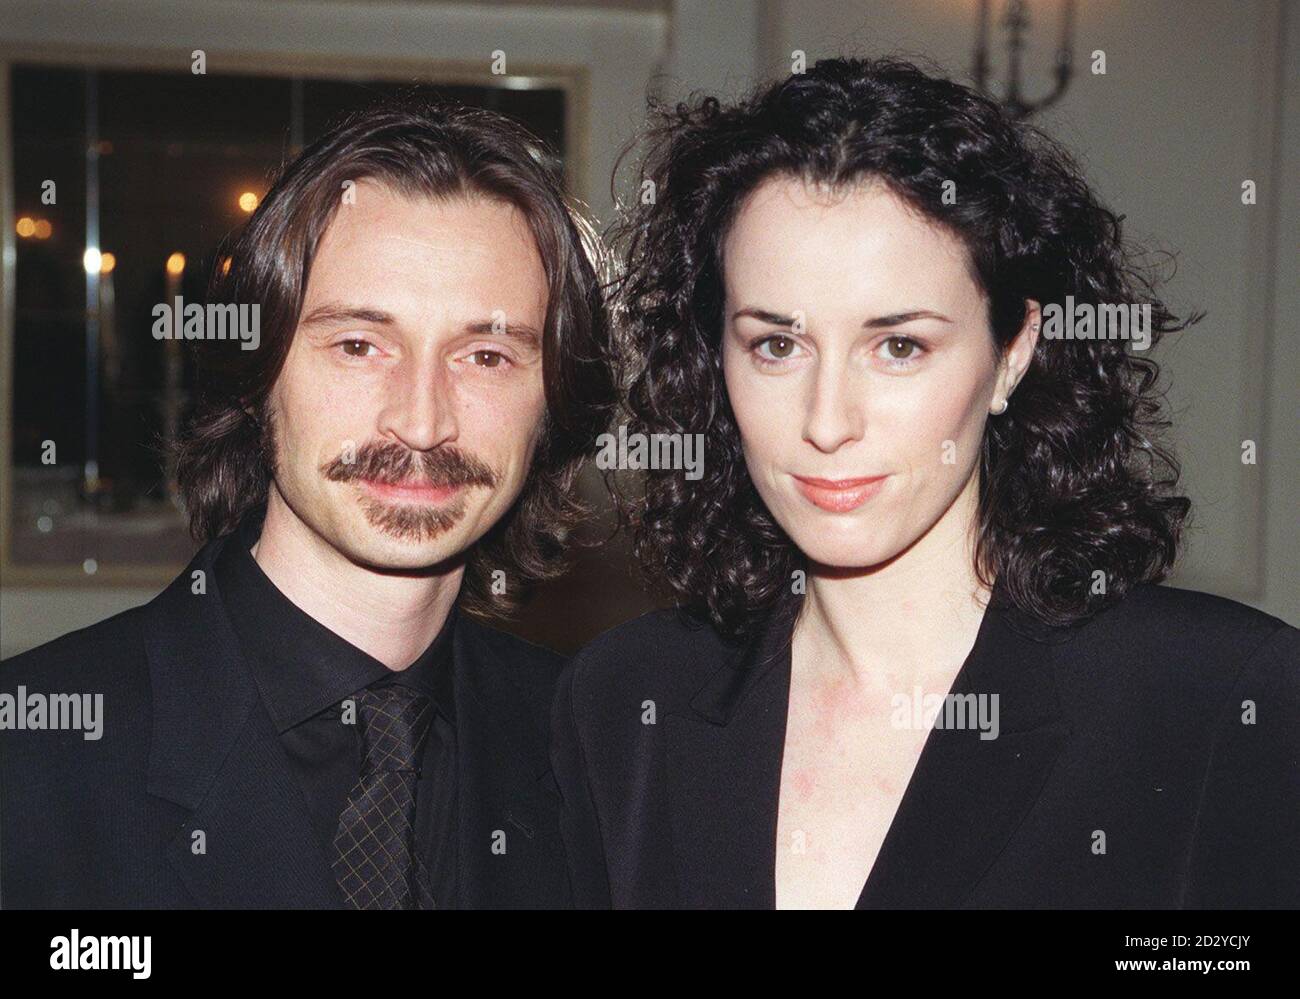 Full Monty film star Robert Carlyle arrives with his wife Anastasia for the Evening Standard British Film Awards. Stock Photo